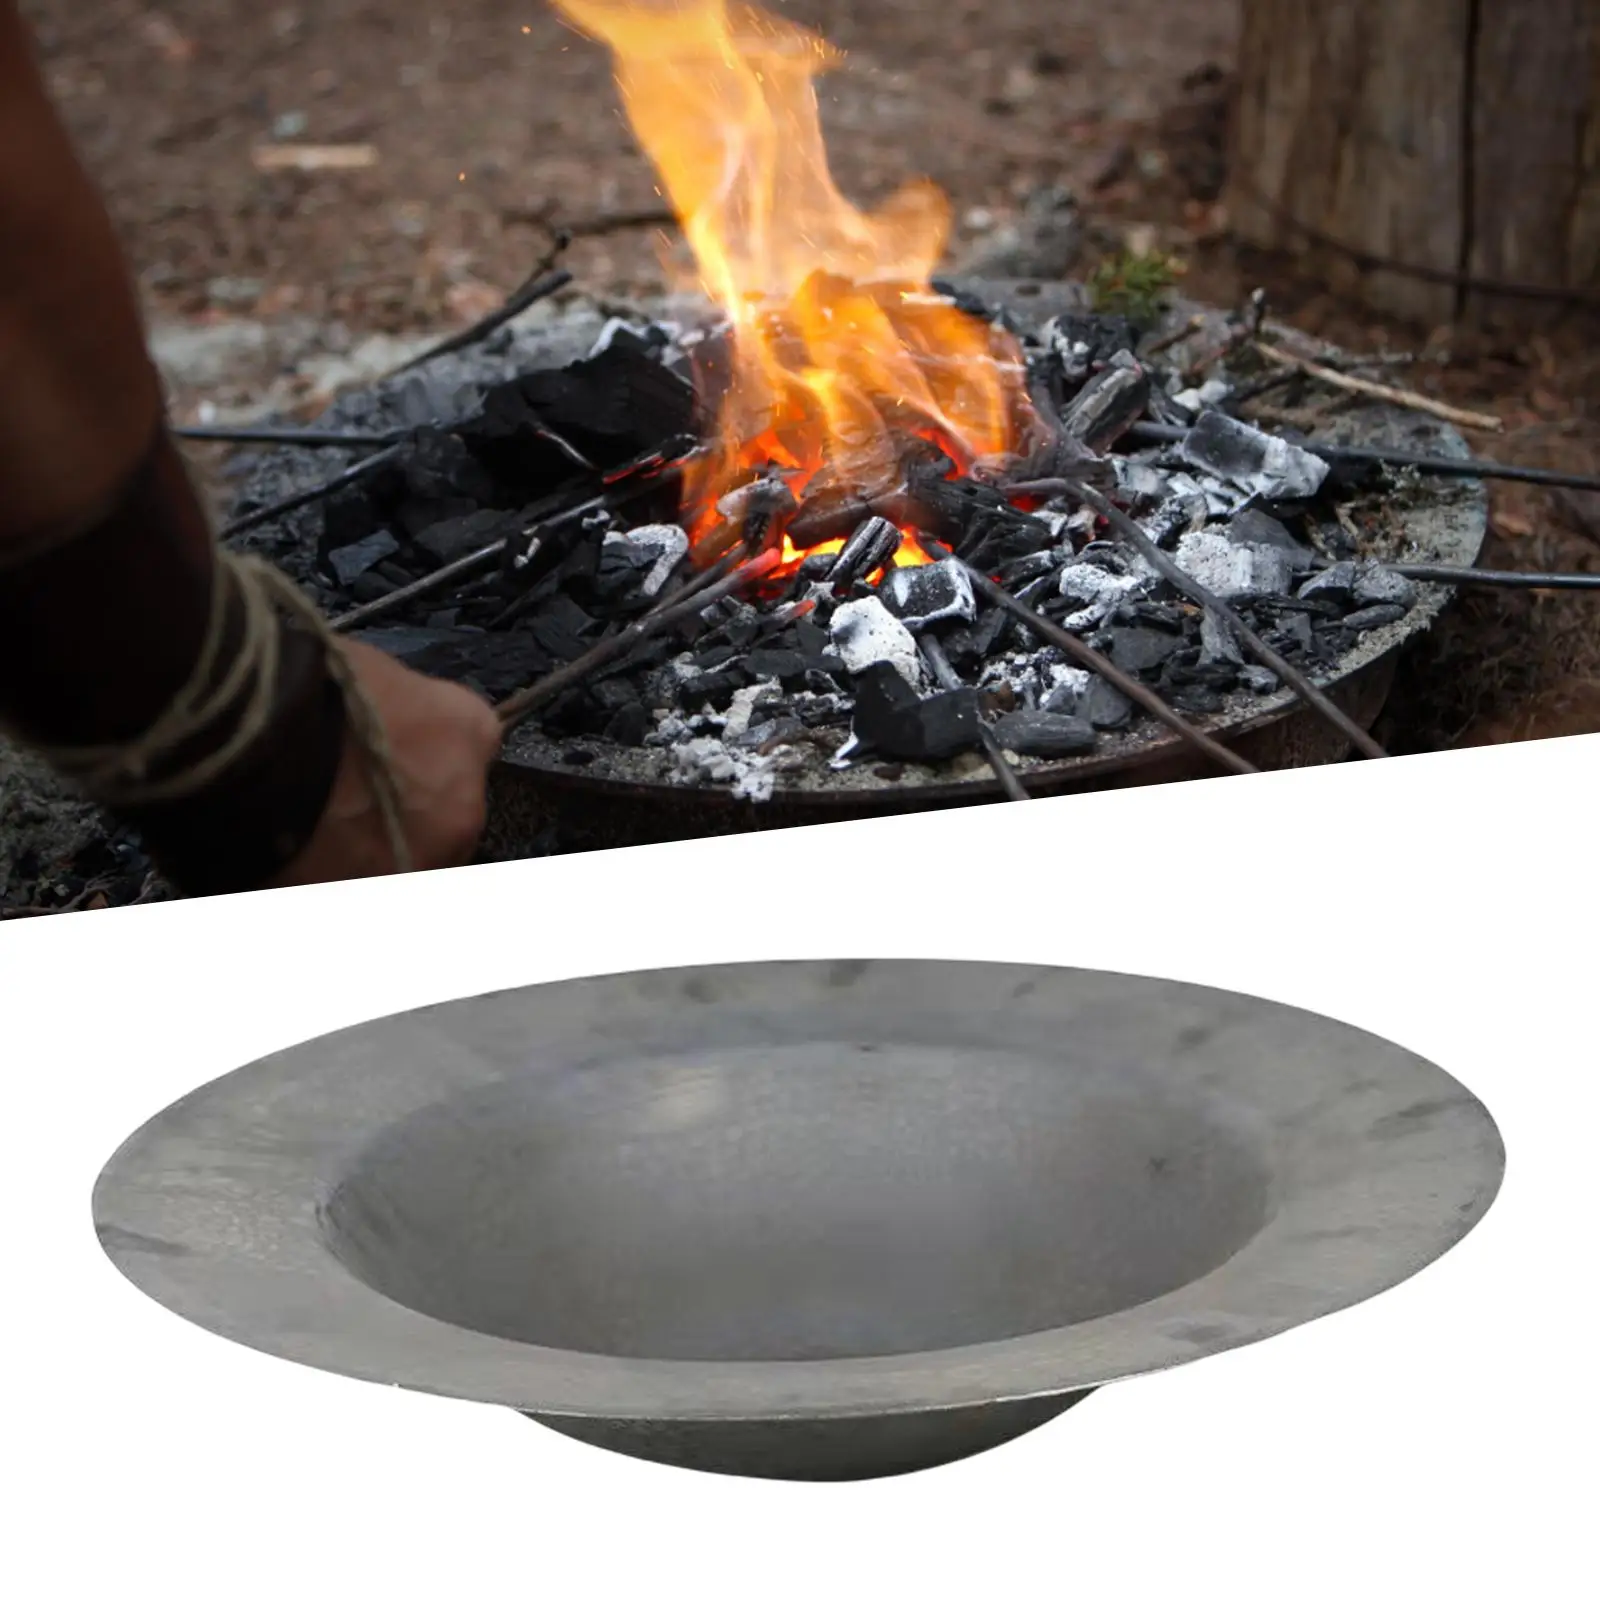 48cm Fire Bowl Charcoal Stove Burner Wood Burning Iron Firewood for Picnic Outdoor